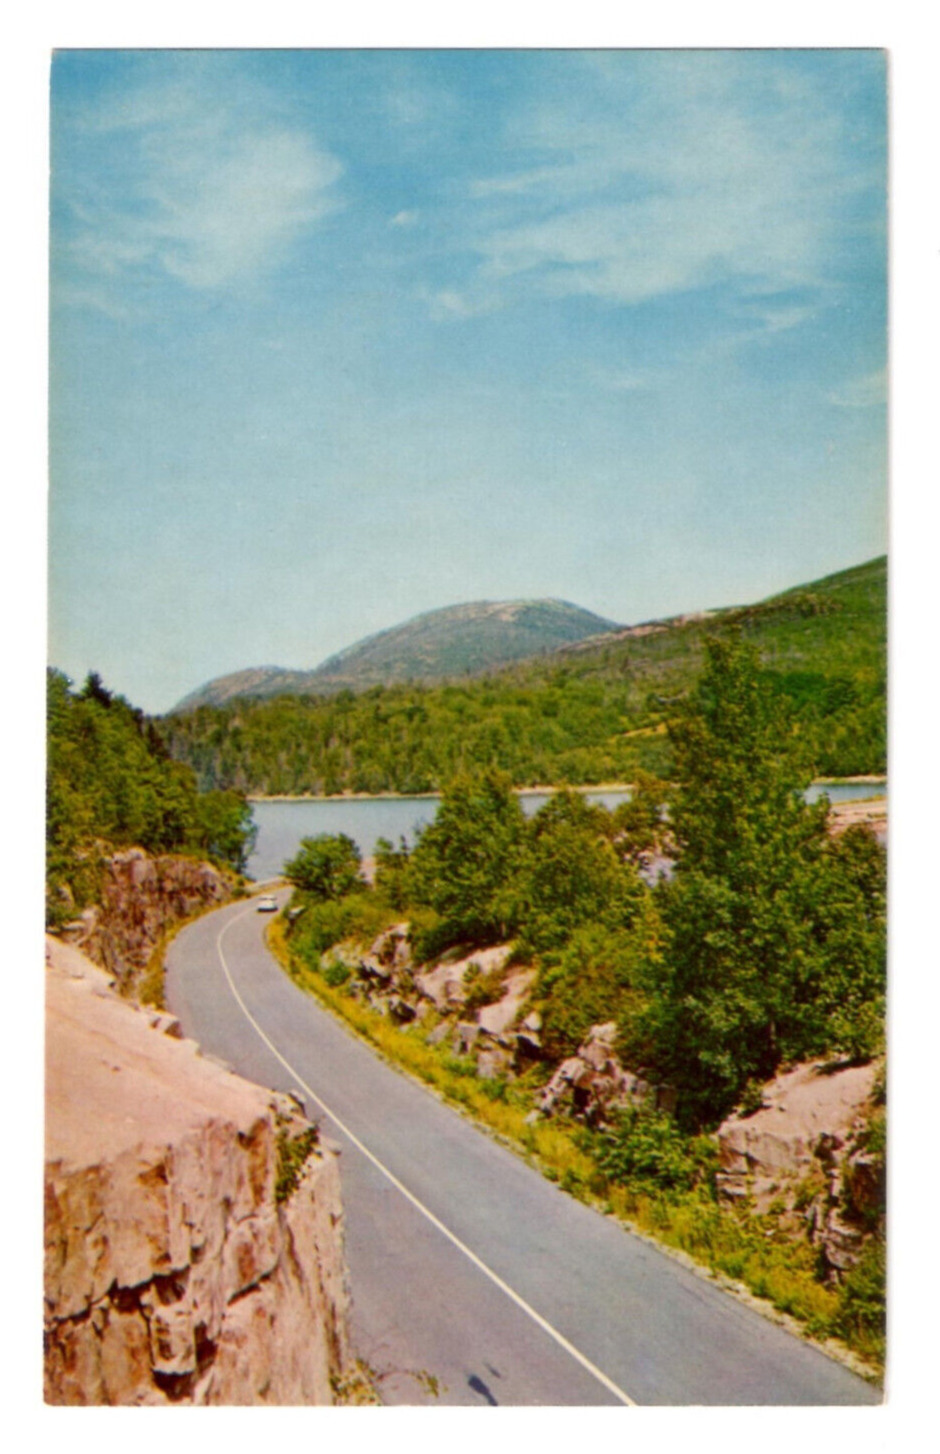 Otter Creek and Ocean Drive, Acadia National Park, Maine Postcard Un-posted